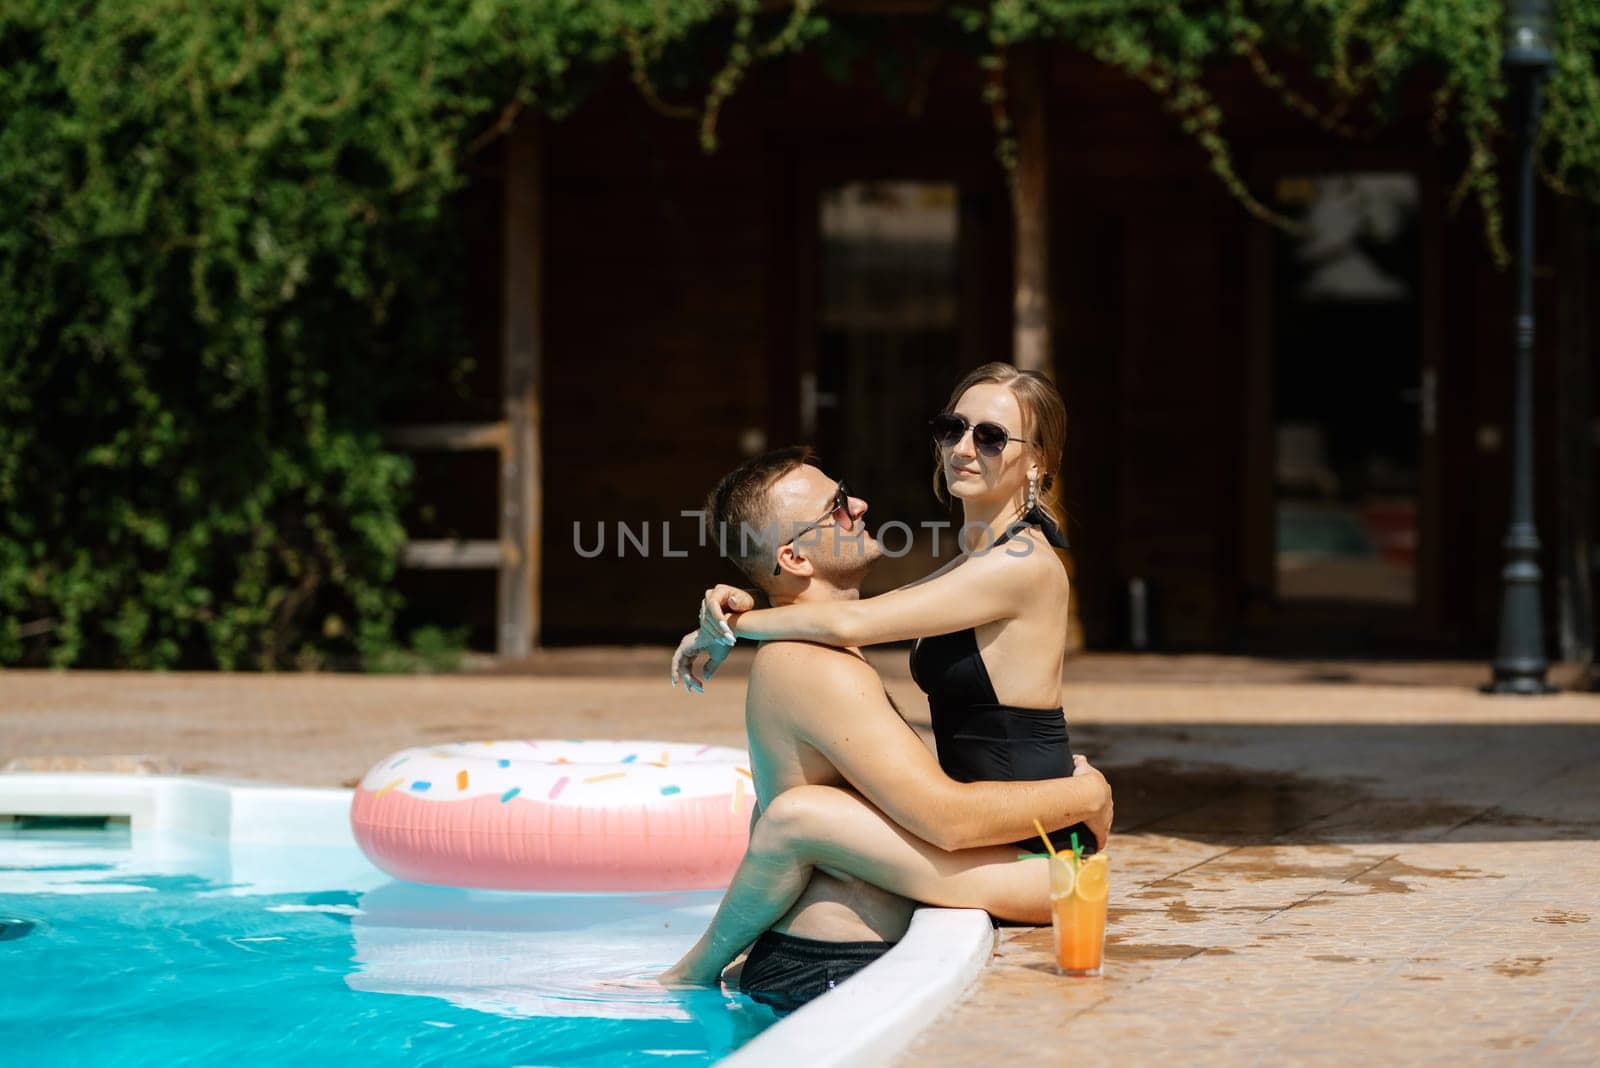 guy and a girl in bathing suits are relaxing, sunbathing and having fun near the blue pool